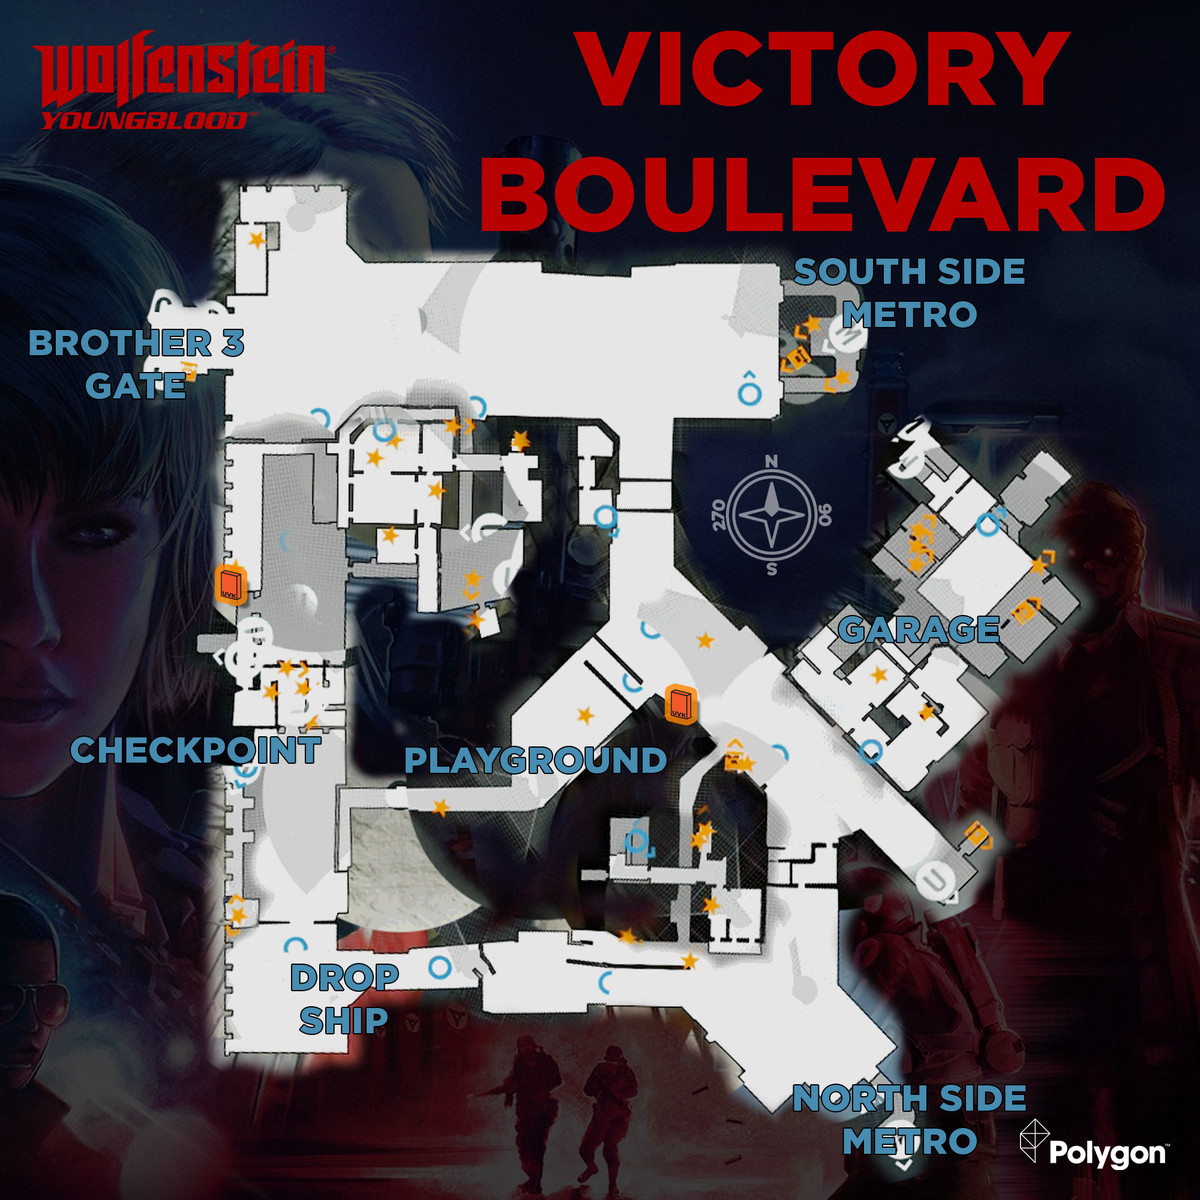 Wolfenstein: Youngblood Victory Boulevard map with UVK Cover icons